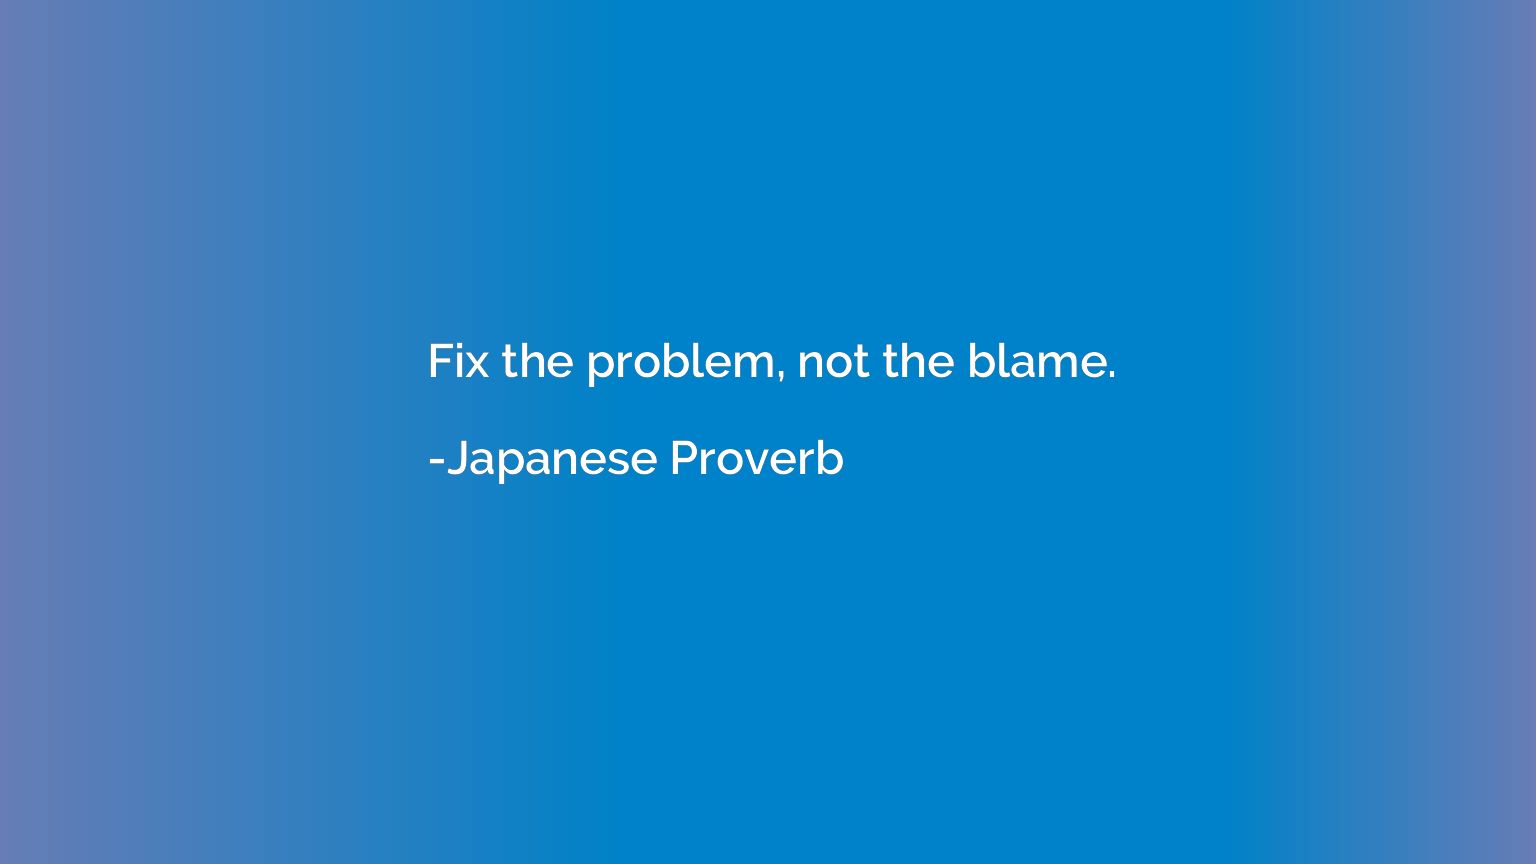 Fix the problem, not the blame.